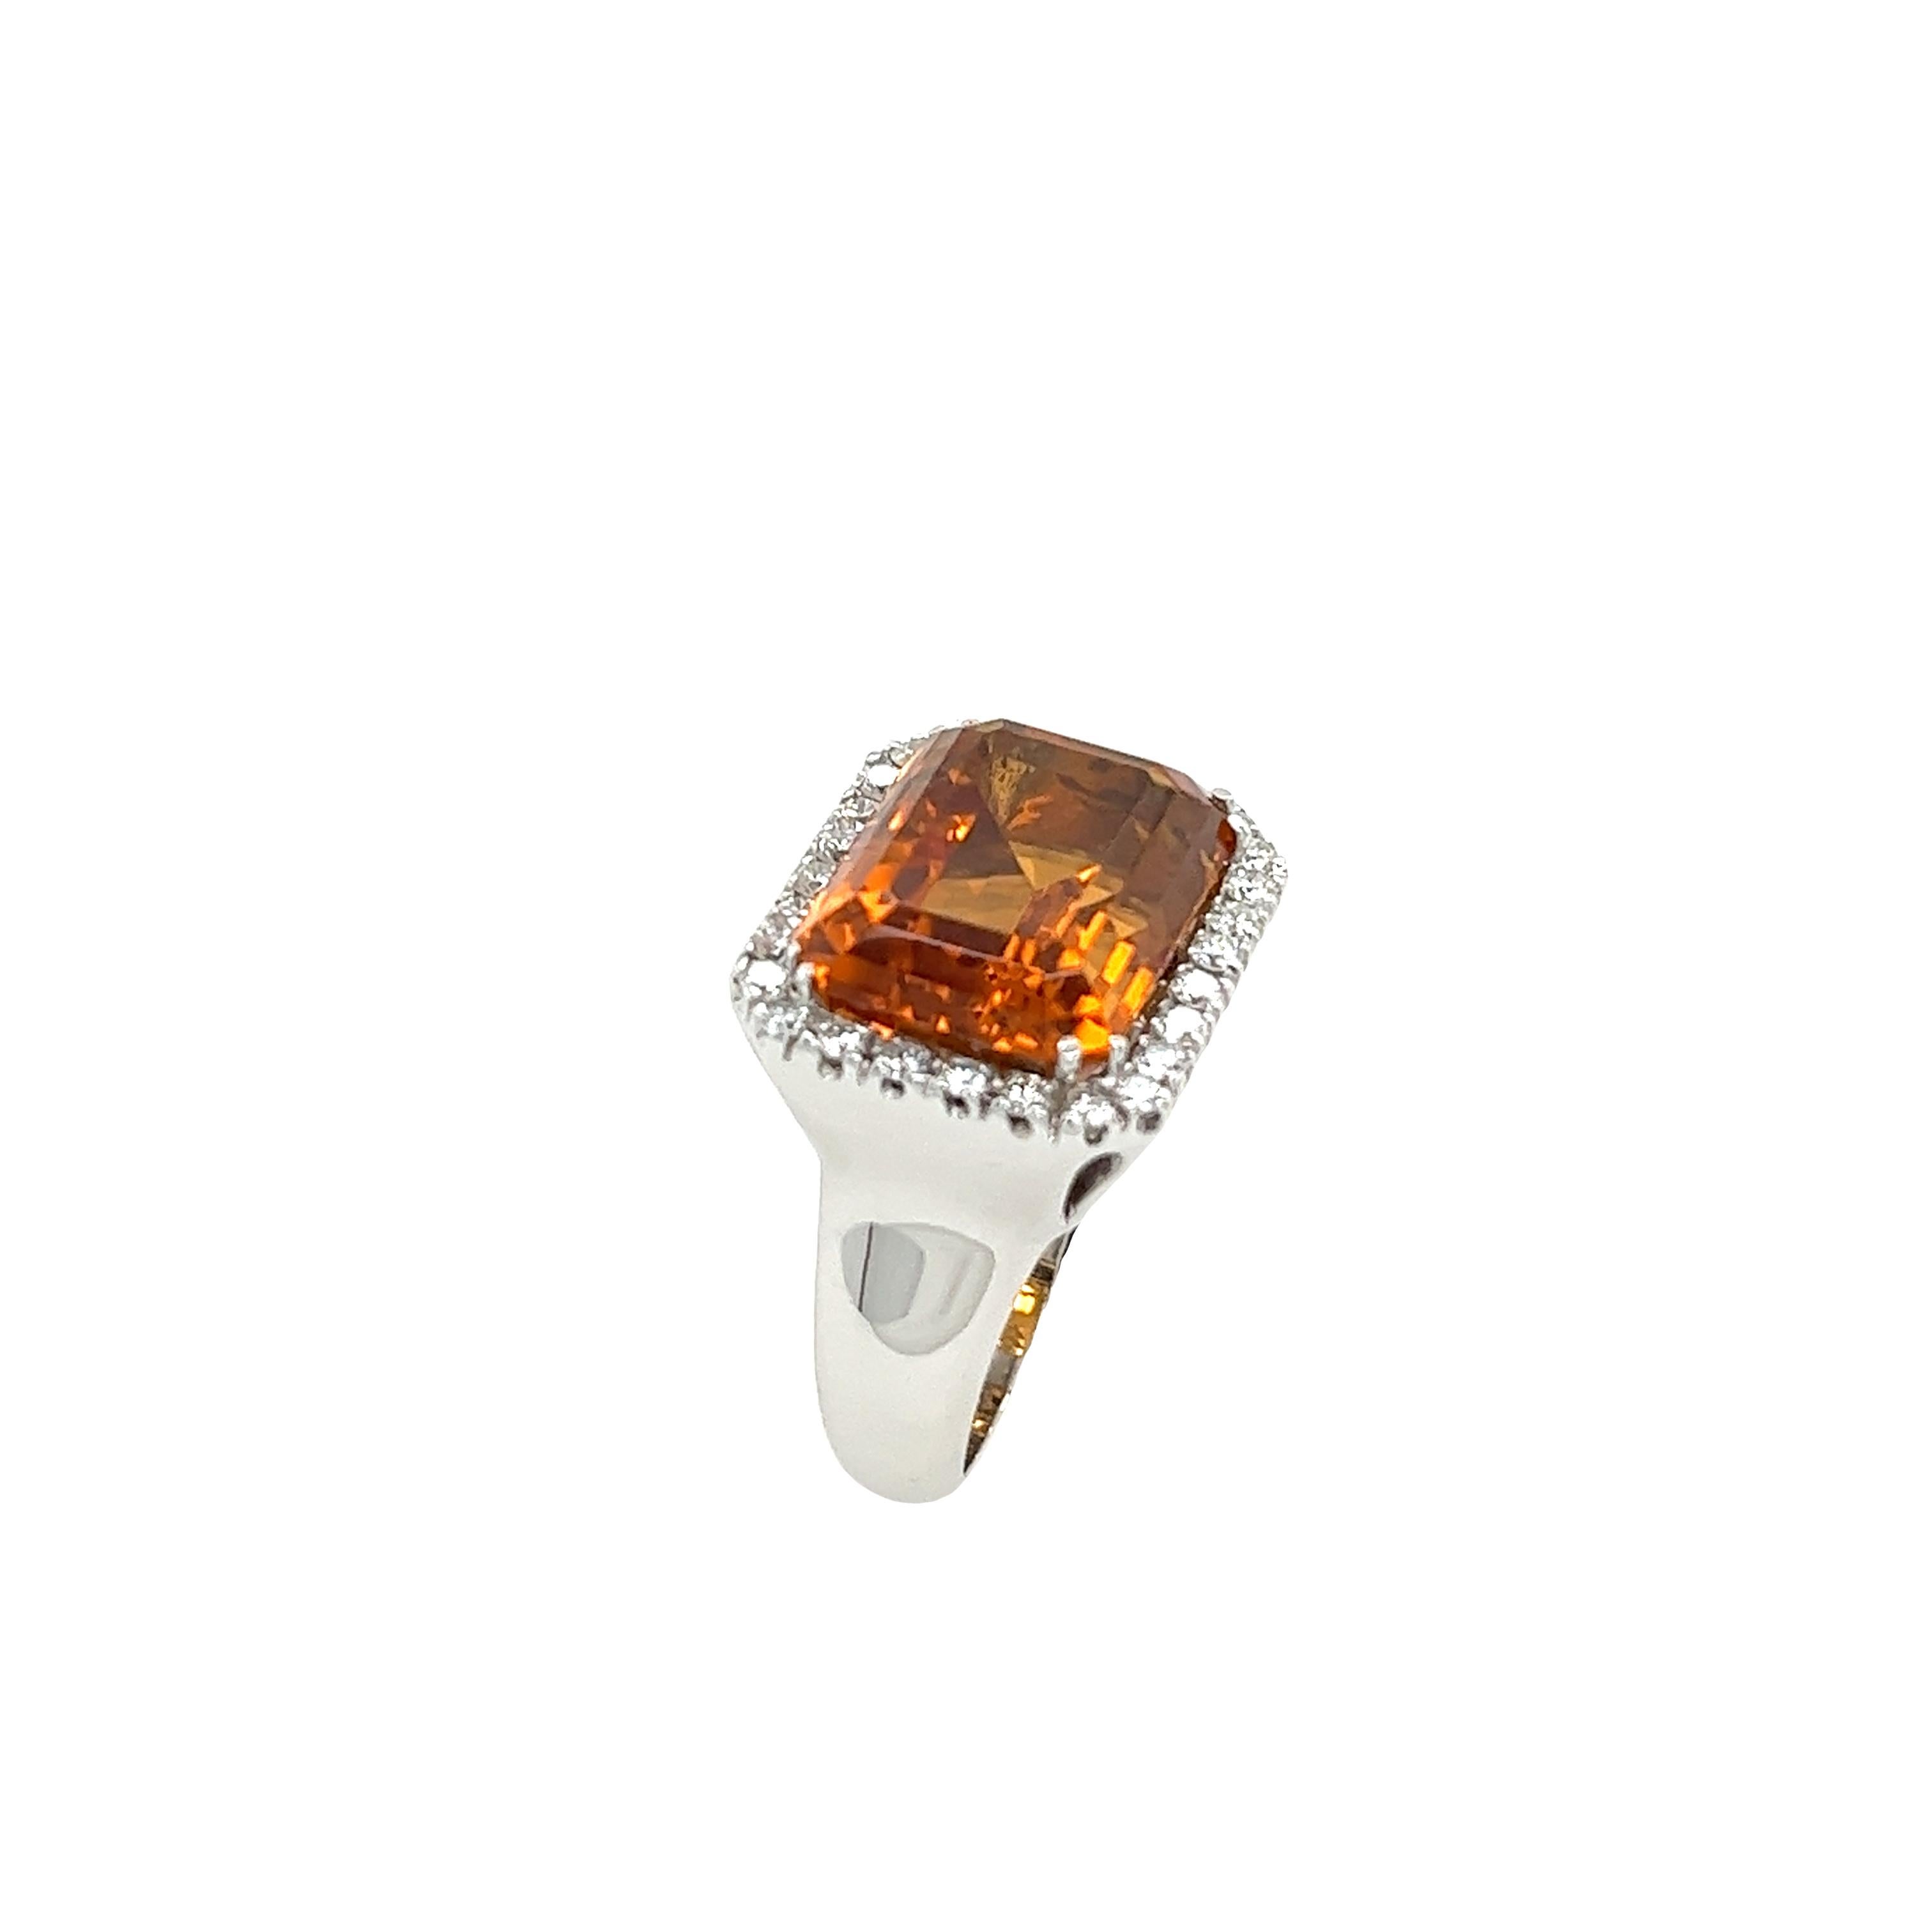 18ct White Gold Fine Quality Citrine &Diamond Ring set with Emerald cut & Halo For Sale 1